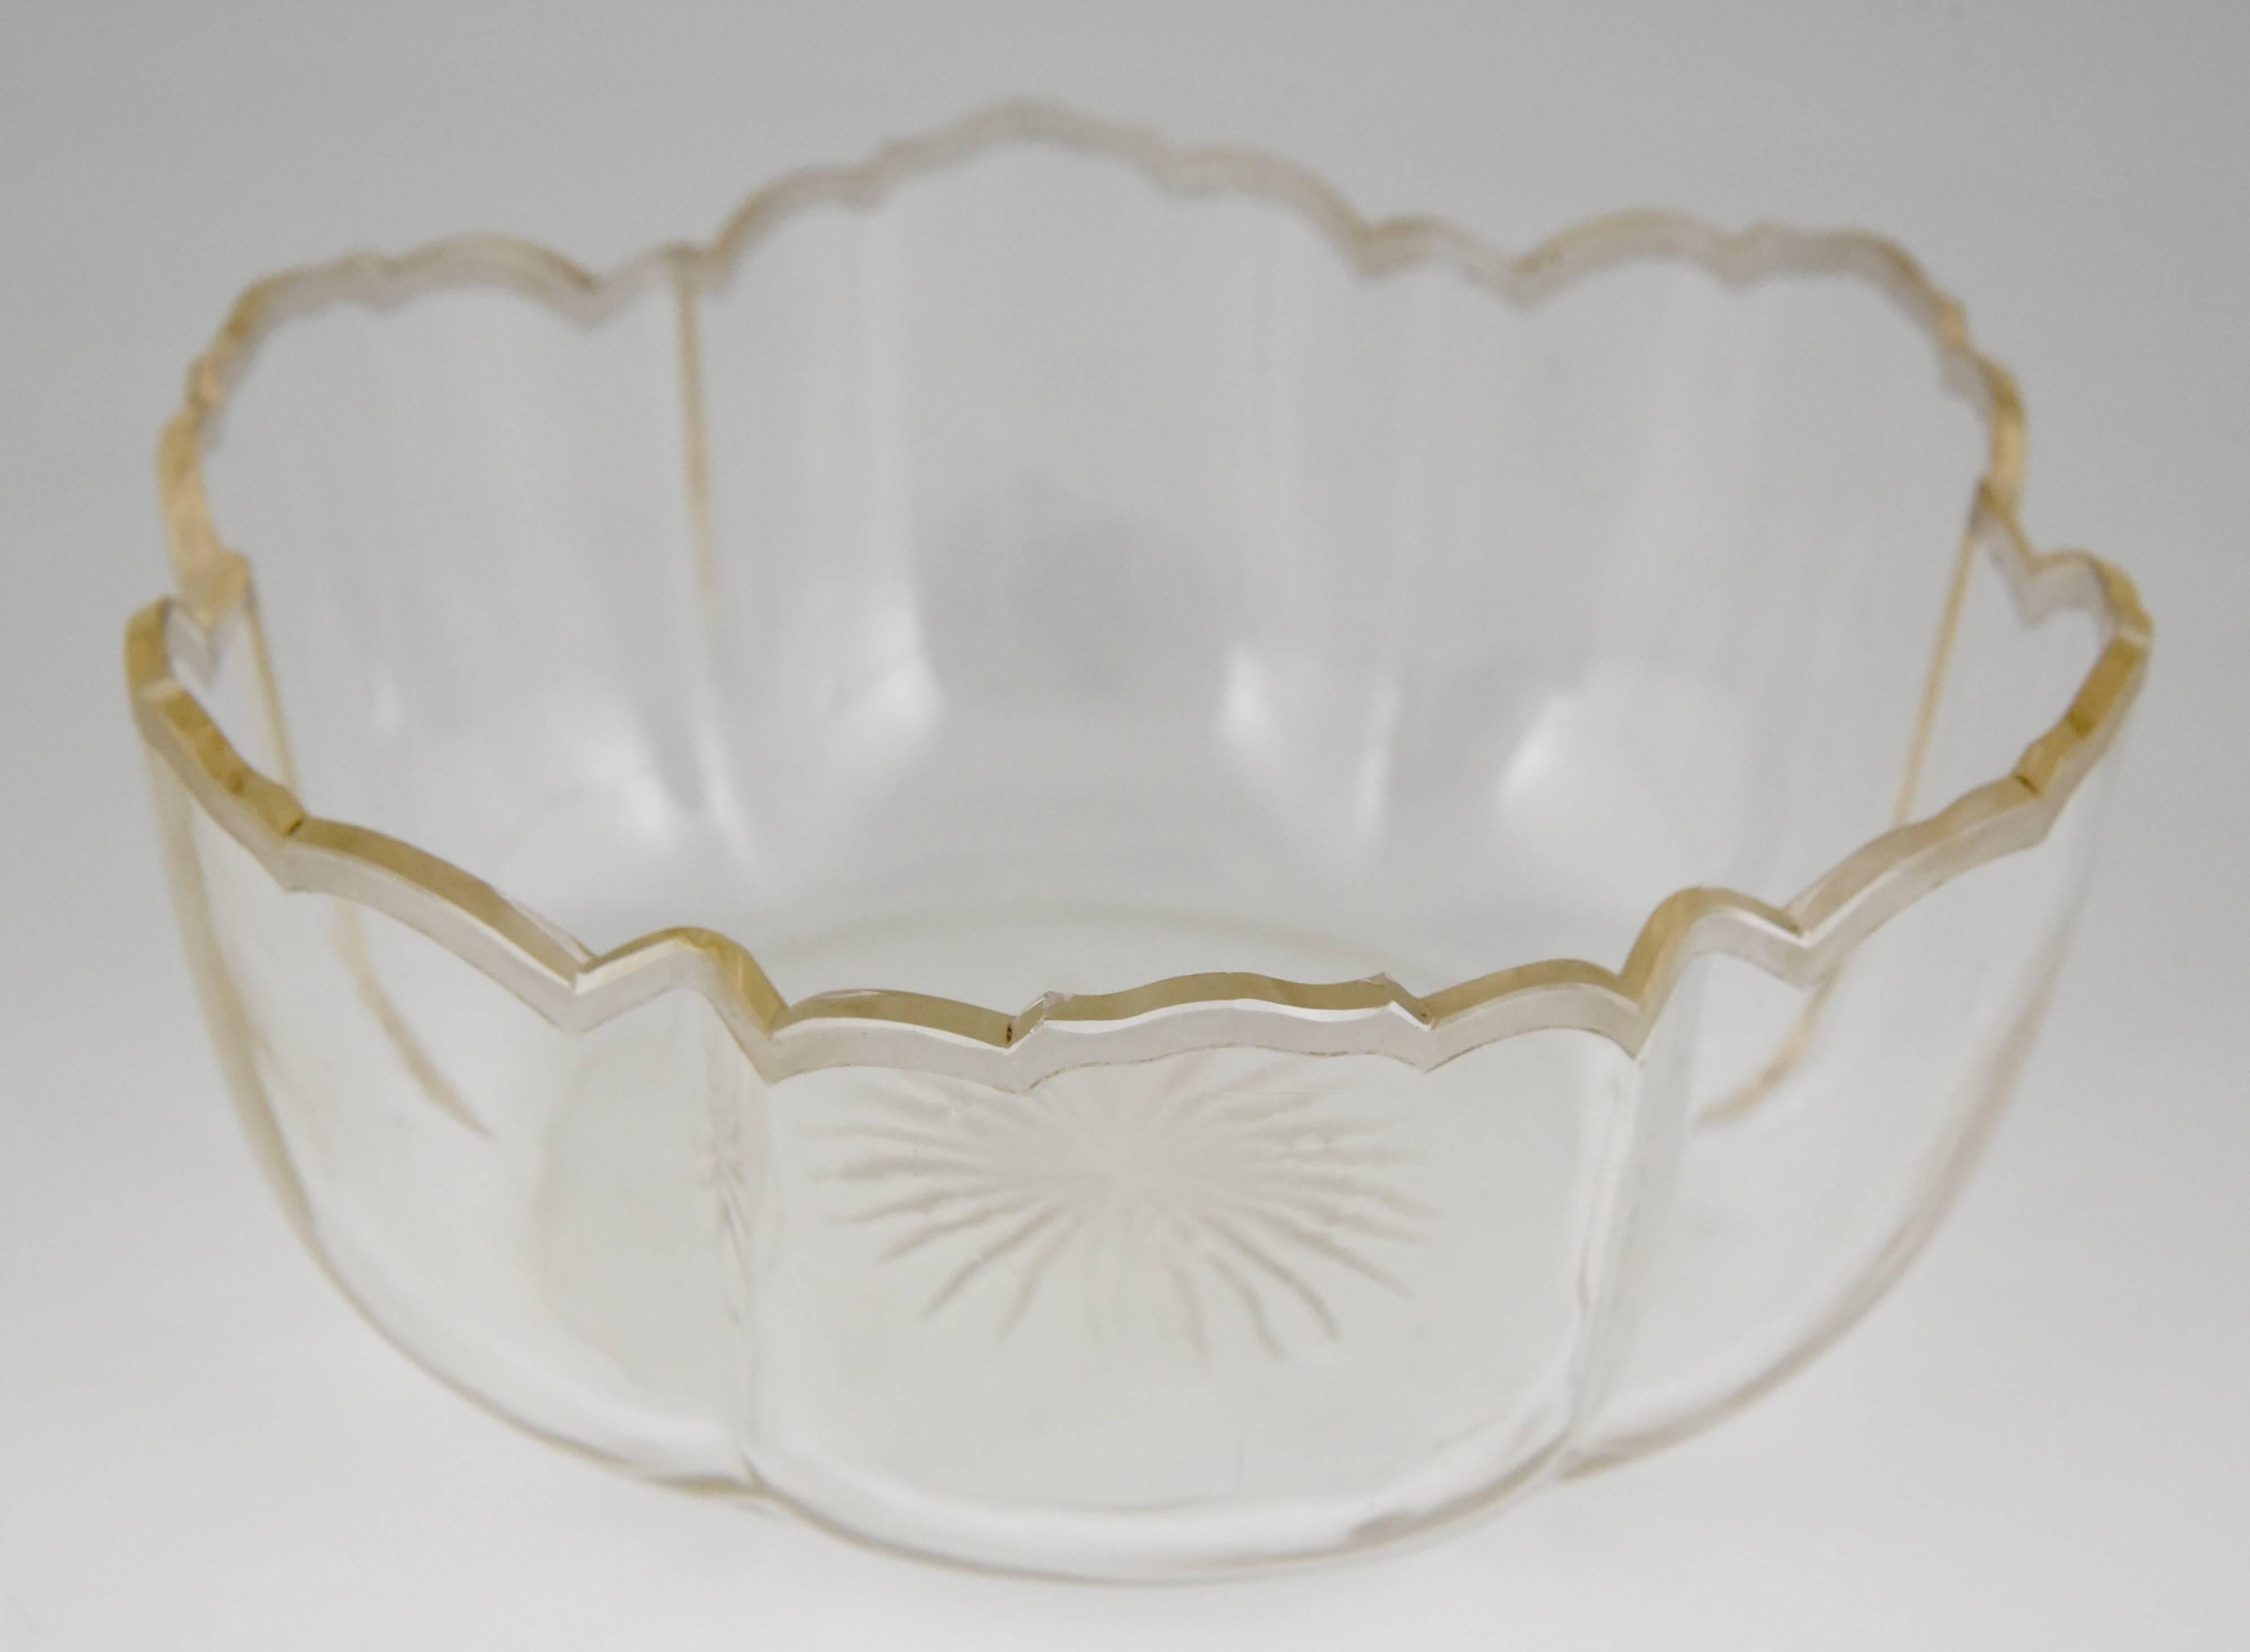 Glass German Art Nouveau silver flower dish with glass liner by A. Strobl, 1900.